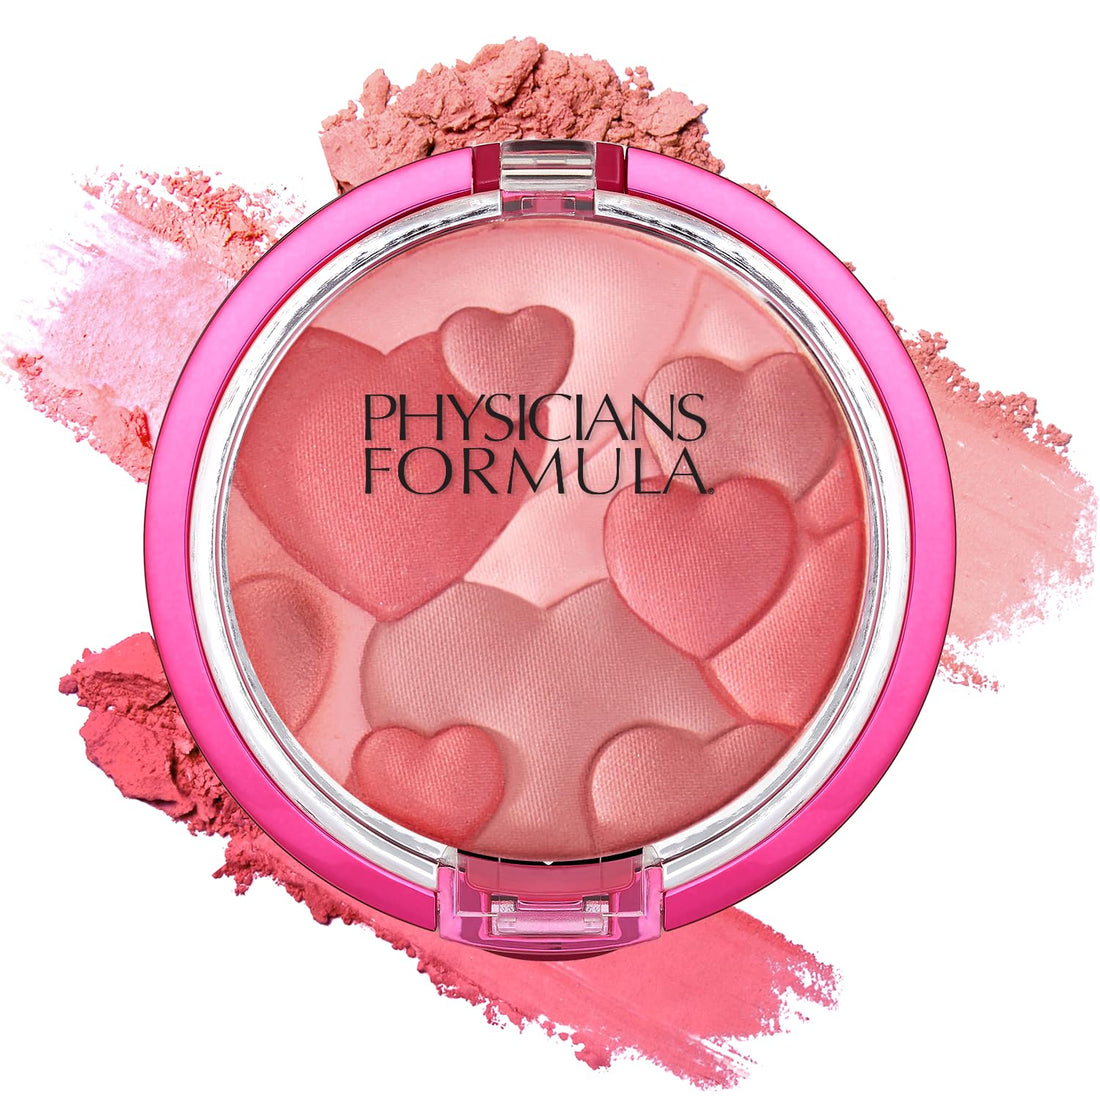 Physicians Formula Happy Booster Glow and Mood Boosting Blush, Rose, 0.24 oz